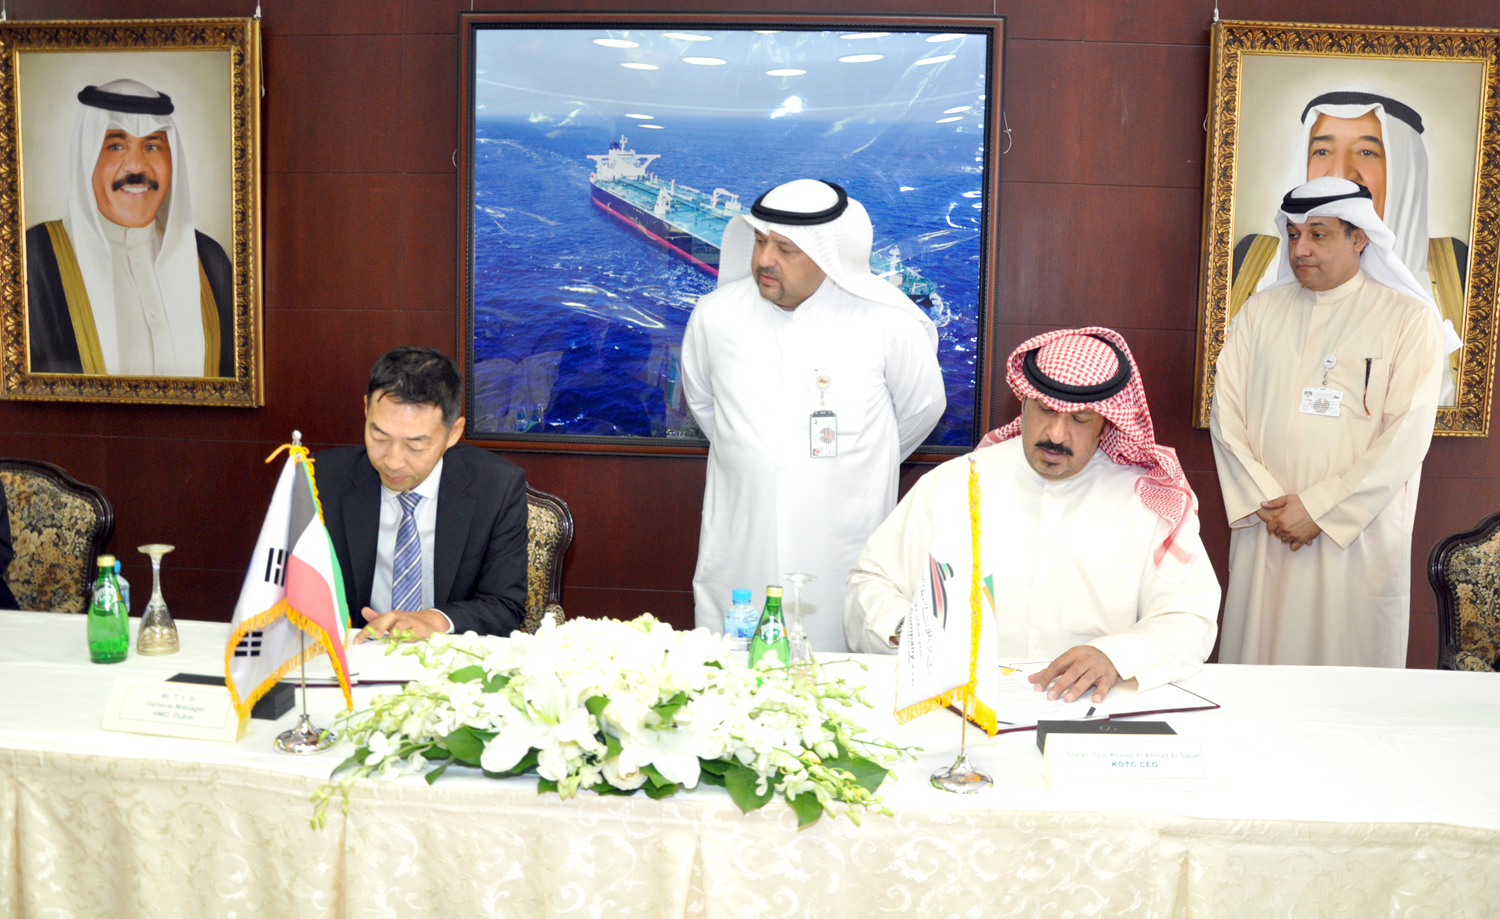 Officials from Kuwait Oil Tanker Company (KOTC) and Hyundai Mipo Dockyard (HMD) during the signing ceremony